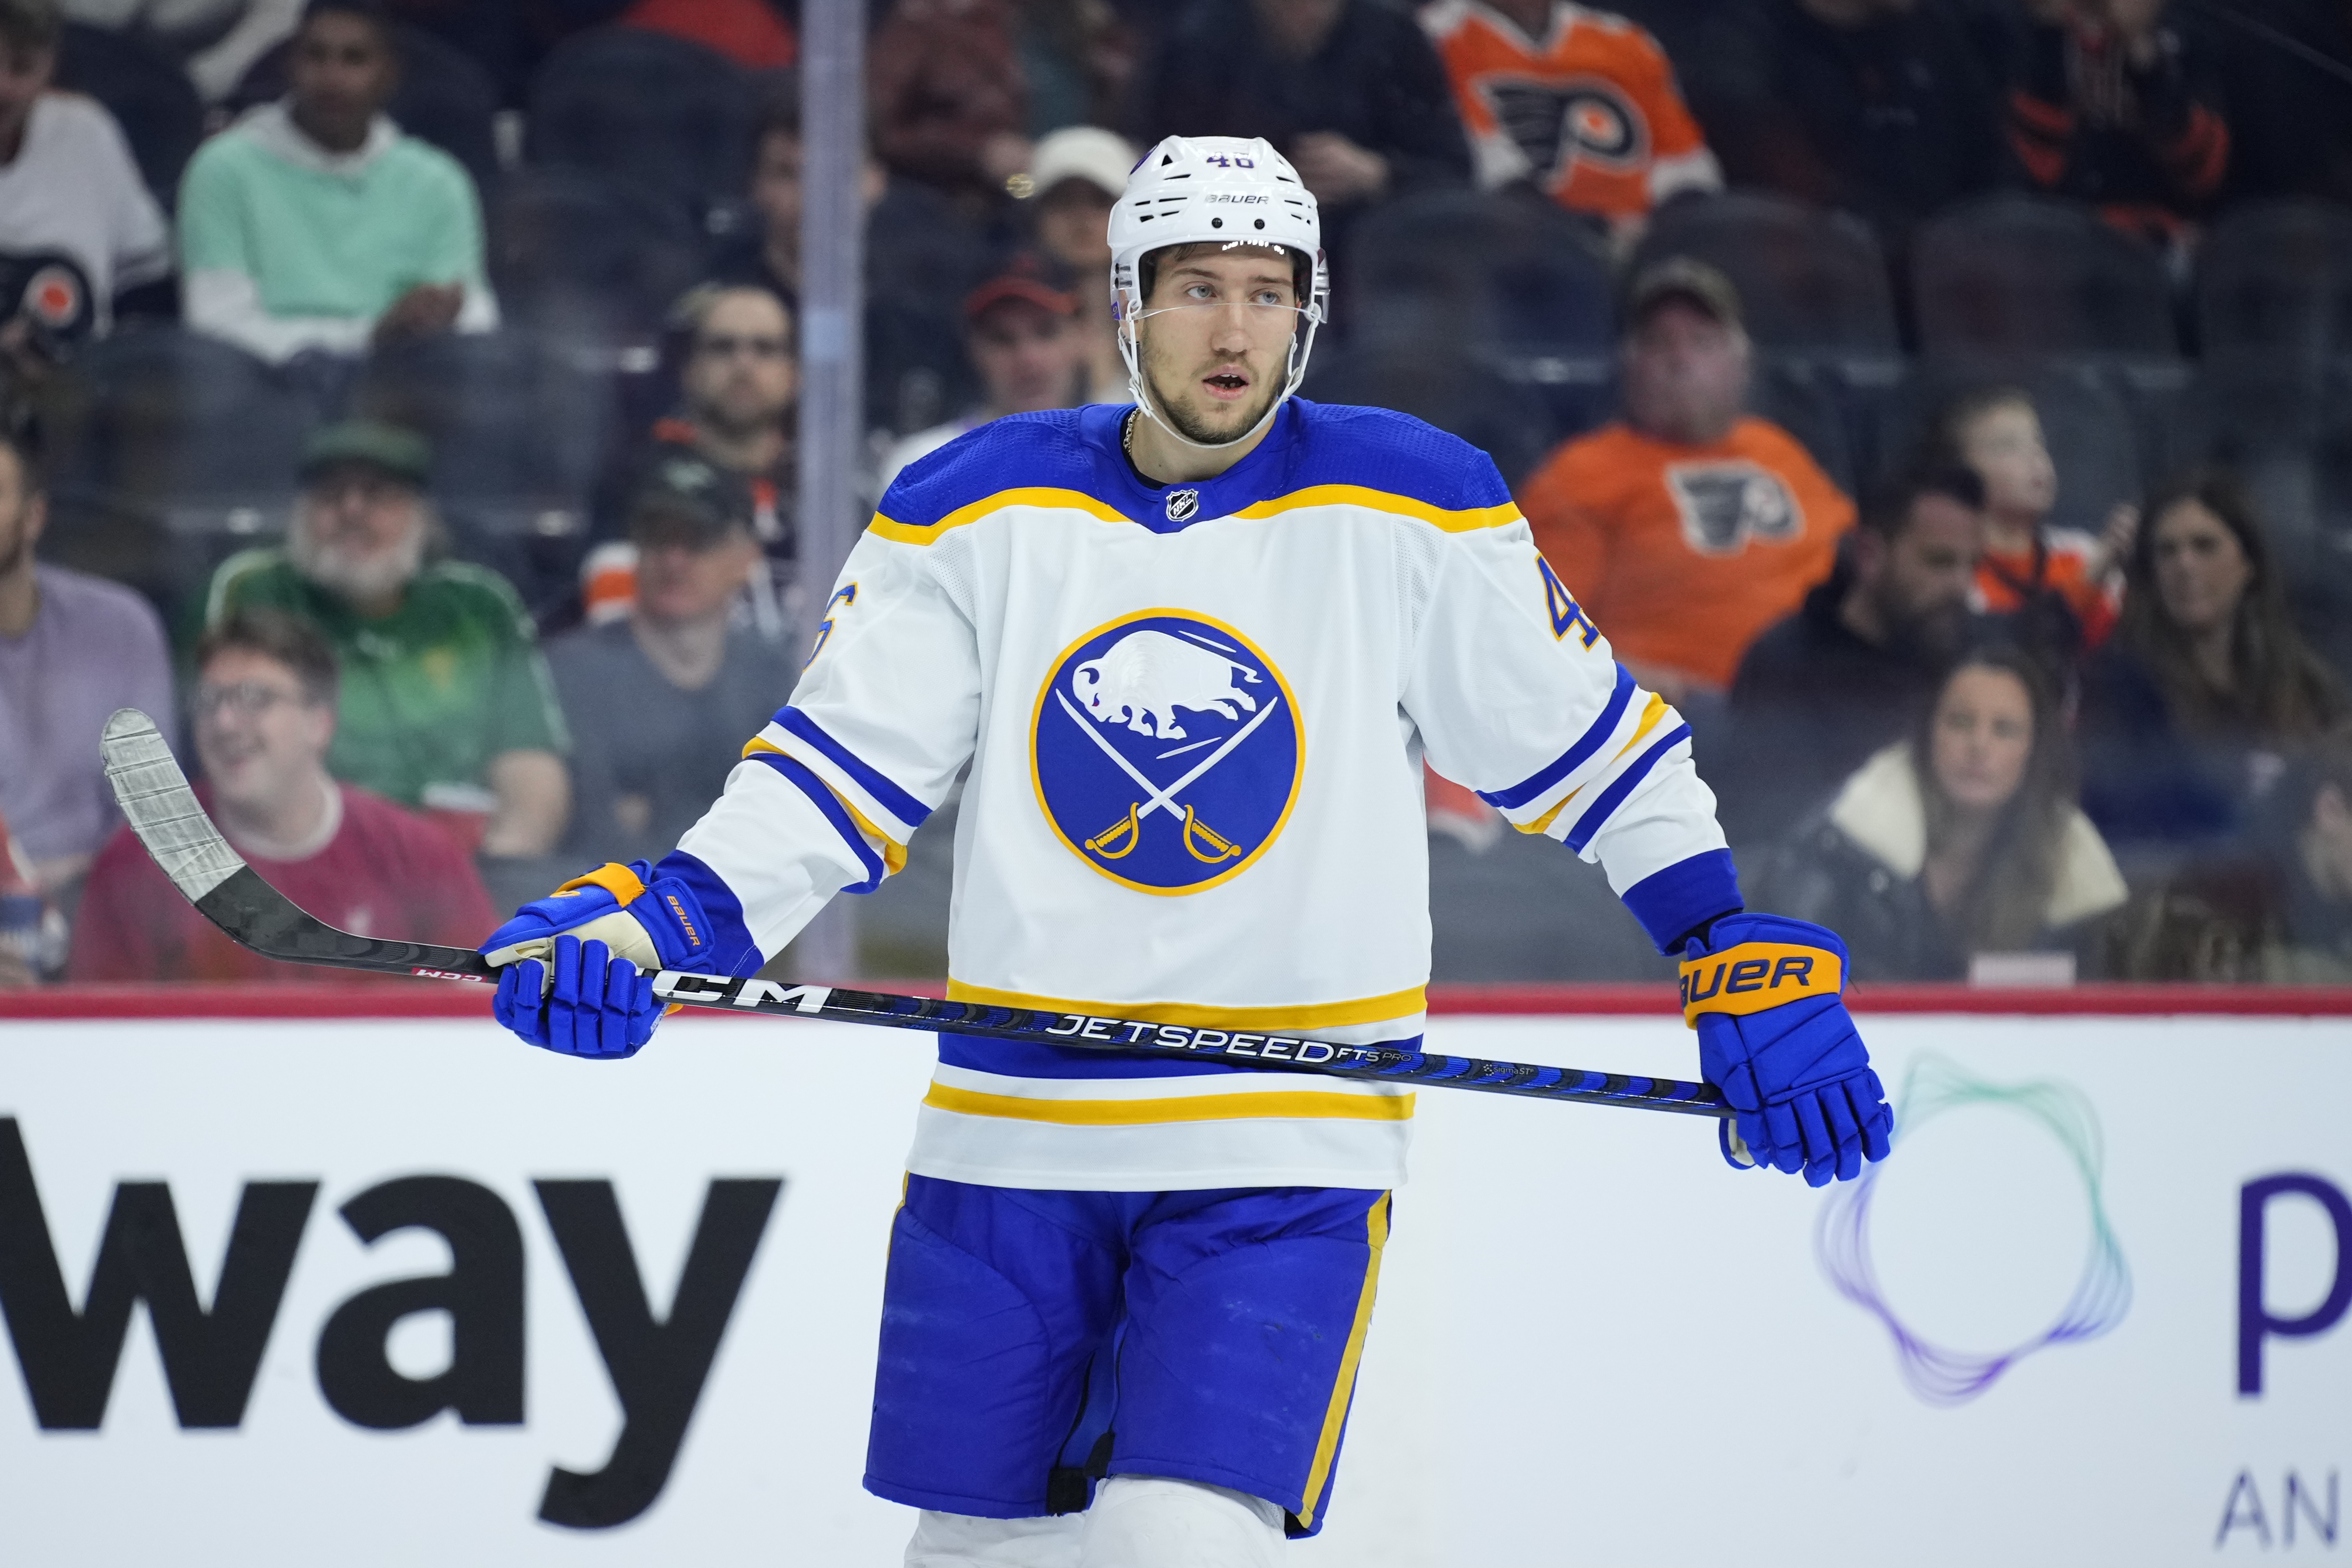 NHL: NHL player refuses to wear a Pride jersey in a warm-up